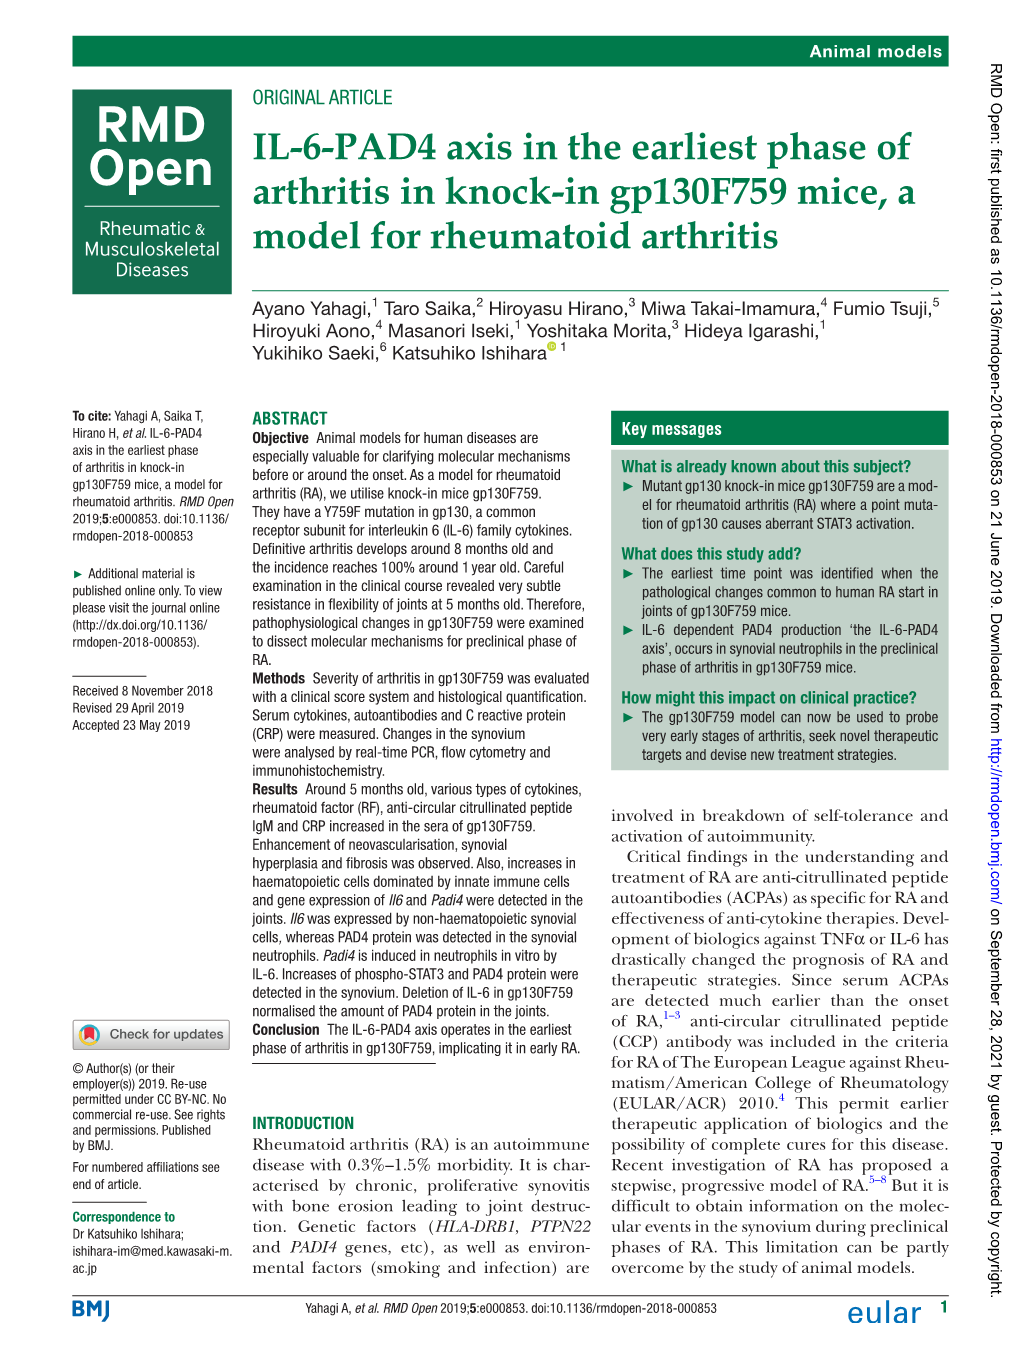 IL-6-PAD4 Axis in the Earliest Phase of Arthritis in Knock-In Gp130f759 Mice, a Model for Rheumatoid Arthritis